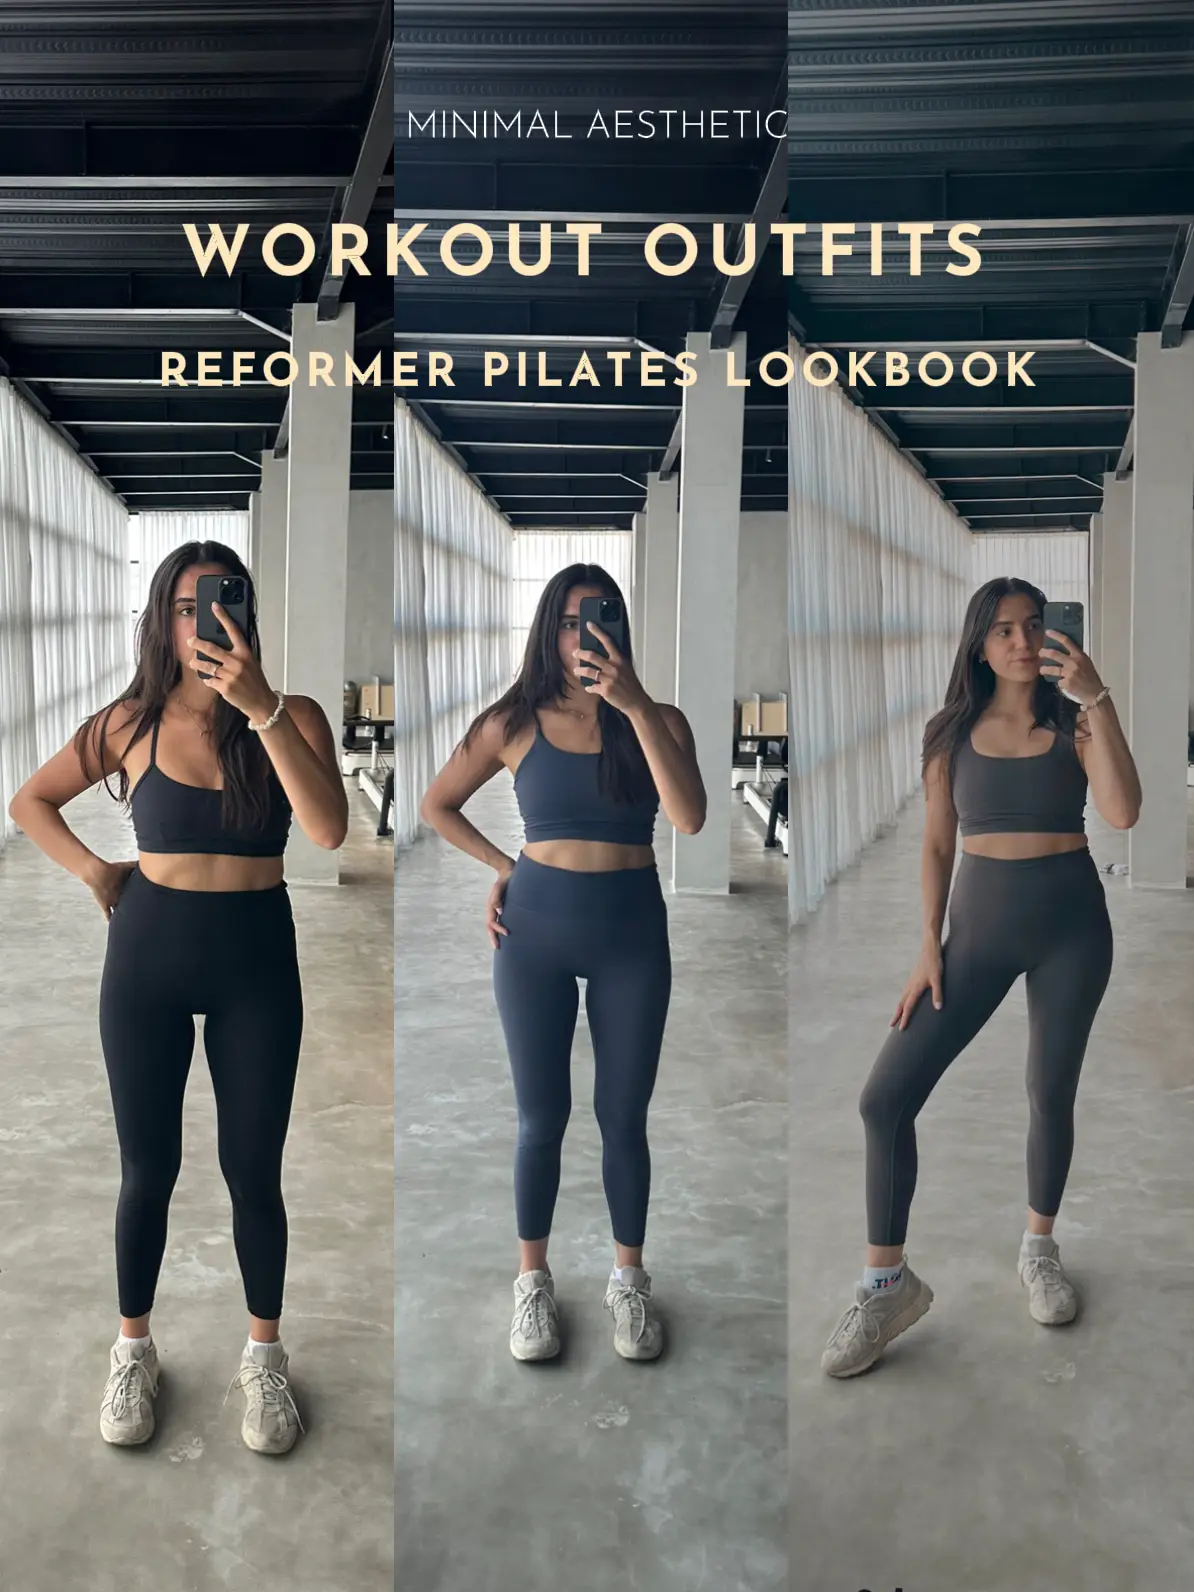 WORKOUT OUTFITS I WORE IN BALI FOR PILATES